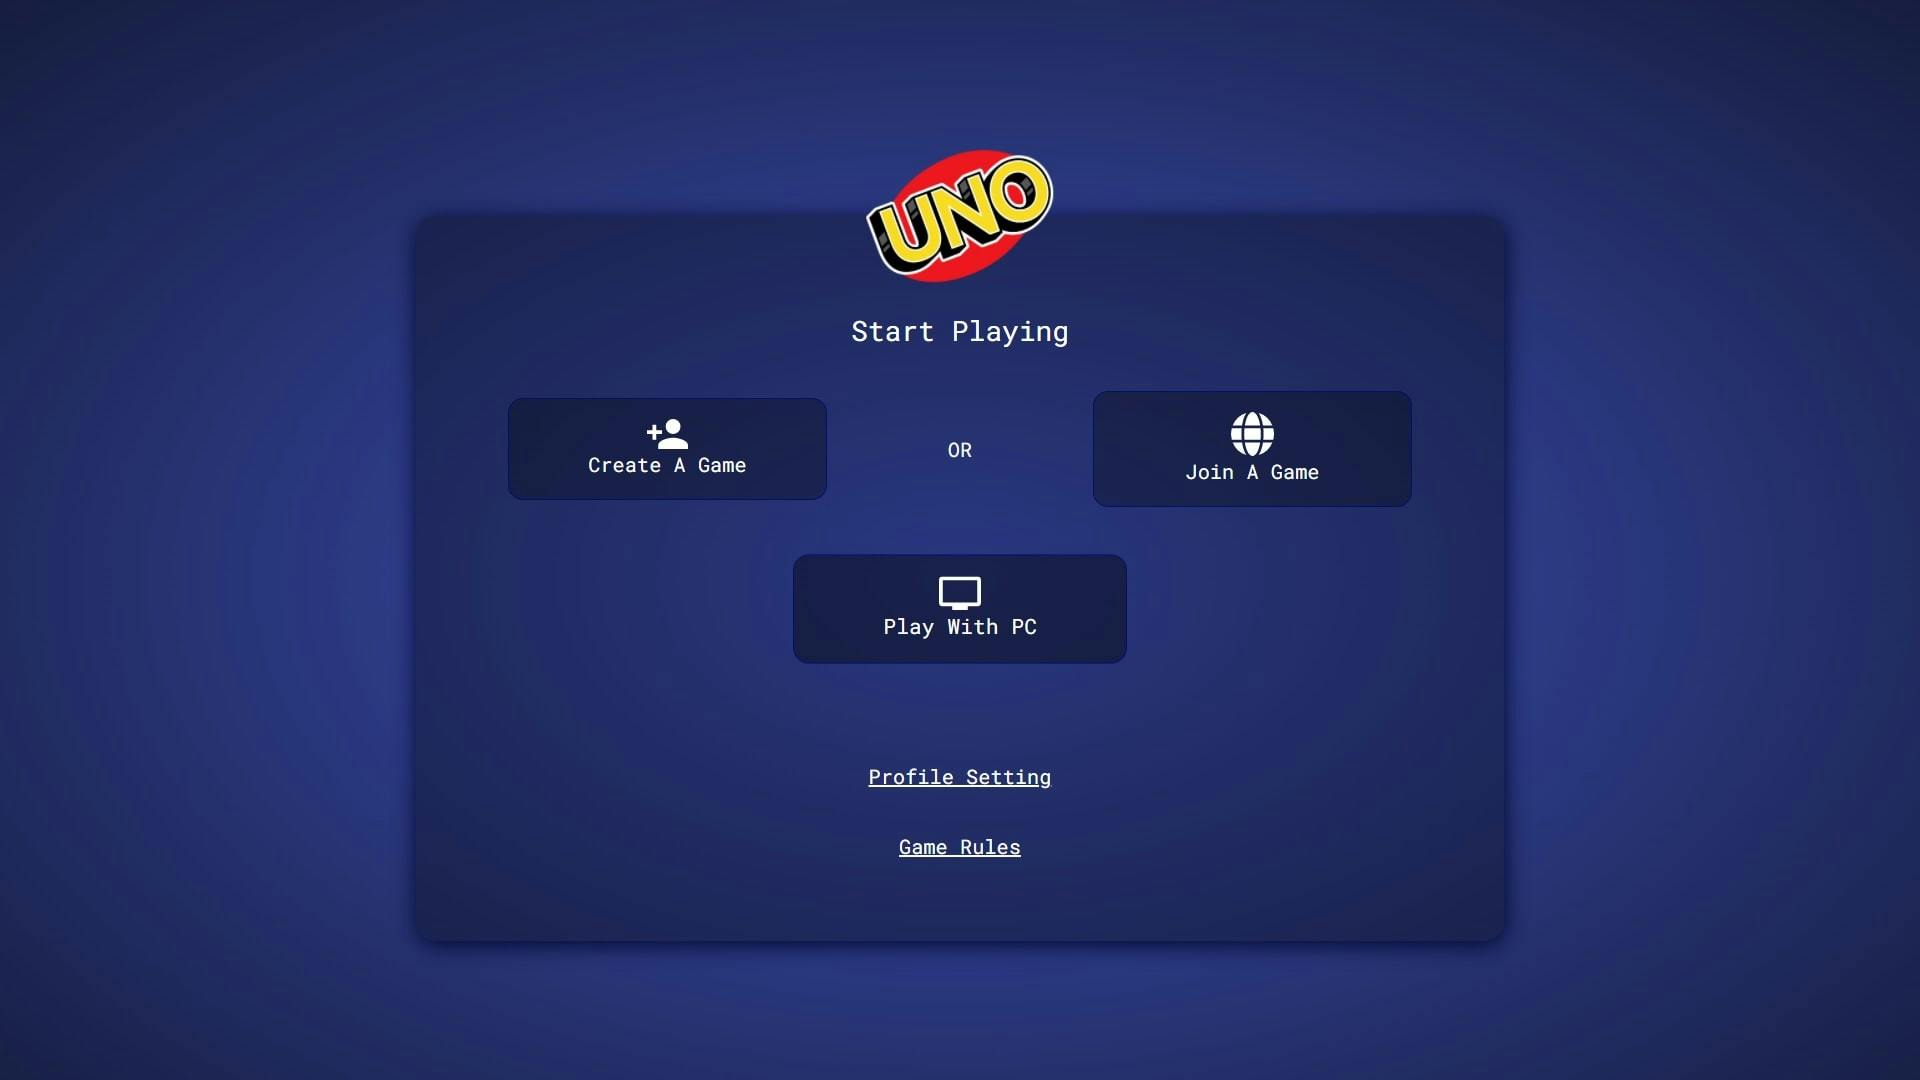 Github/uno-online: Two player online game of UNO. Made using React